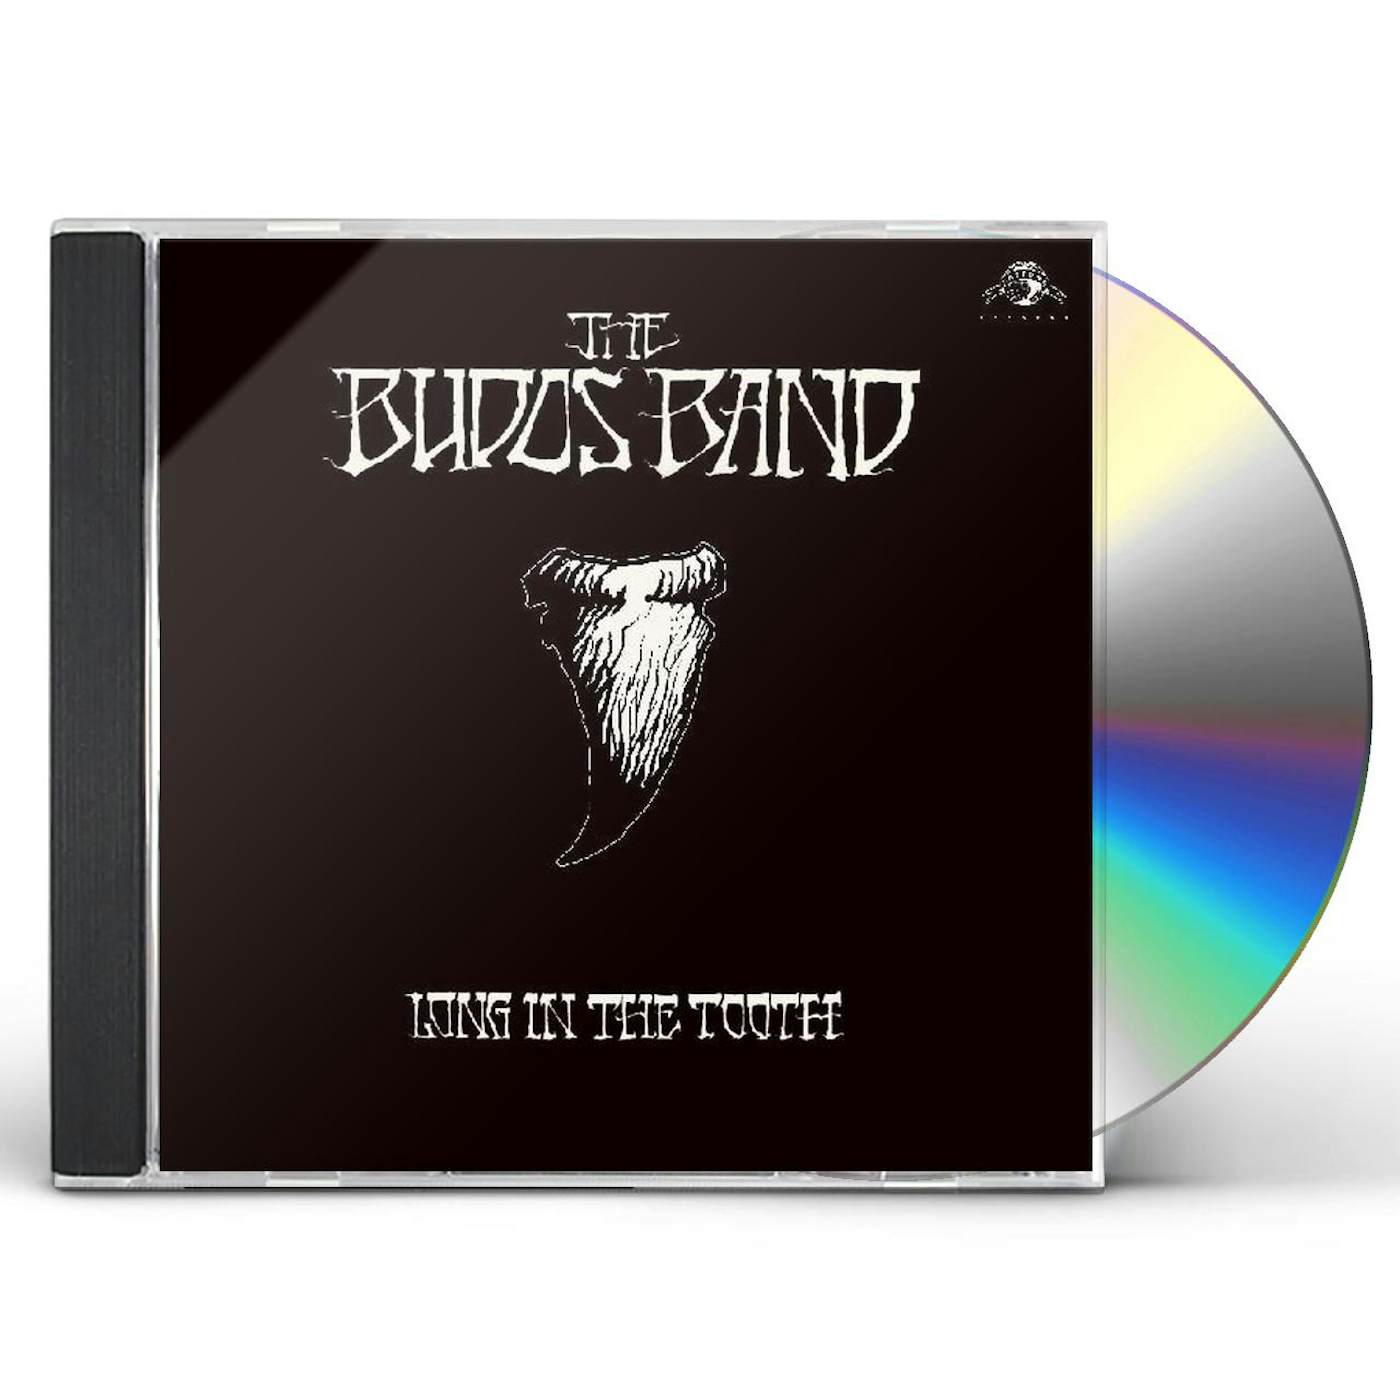 The Budos Band LONG IN THE TOOTH CD